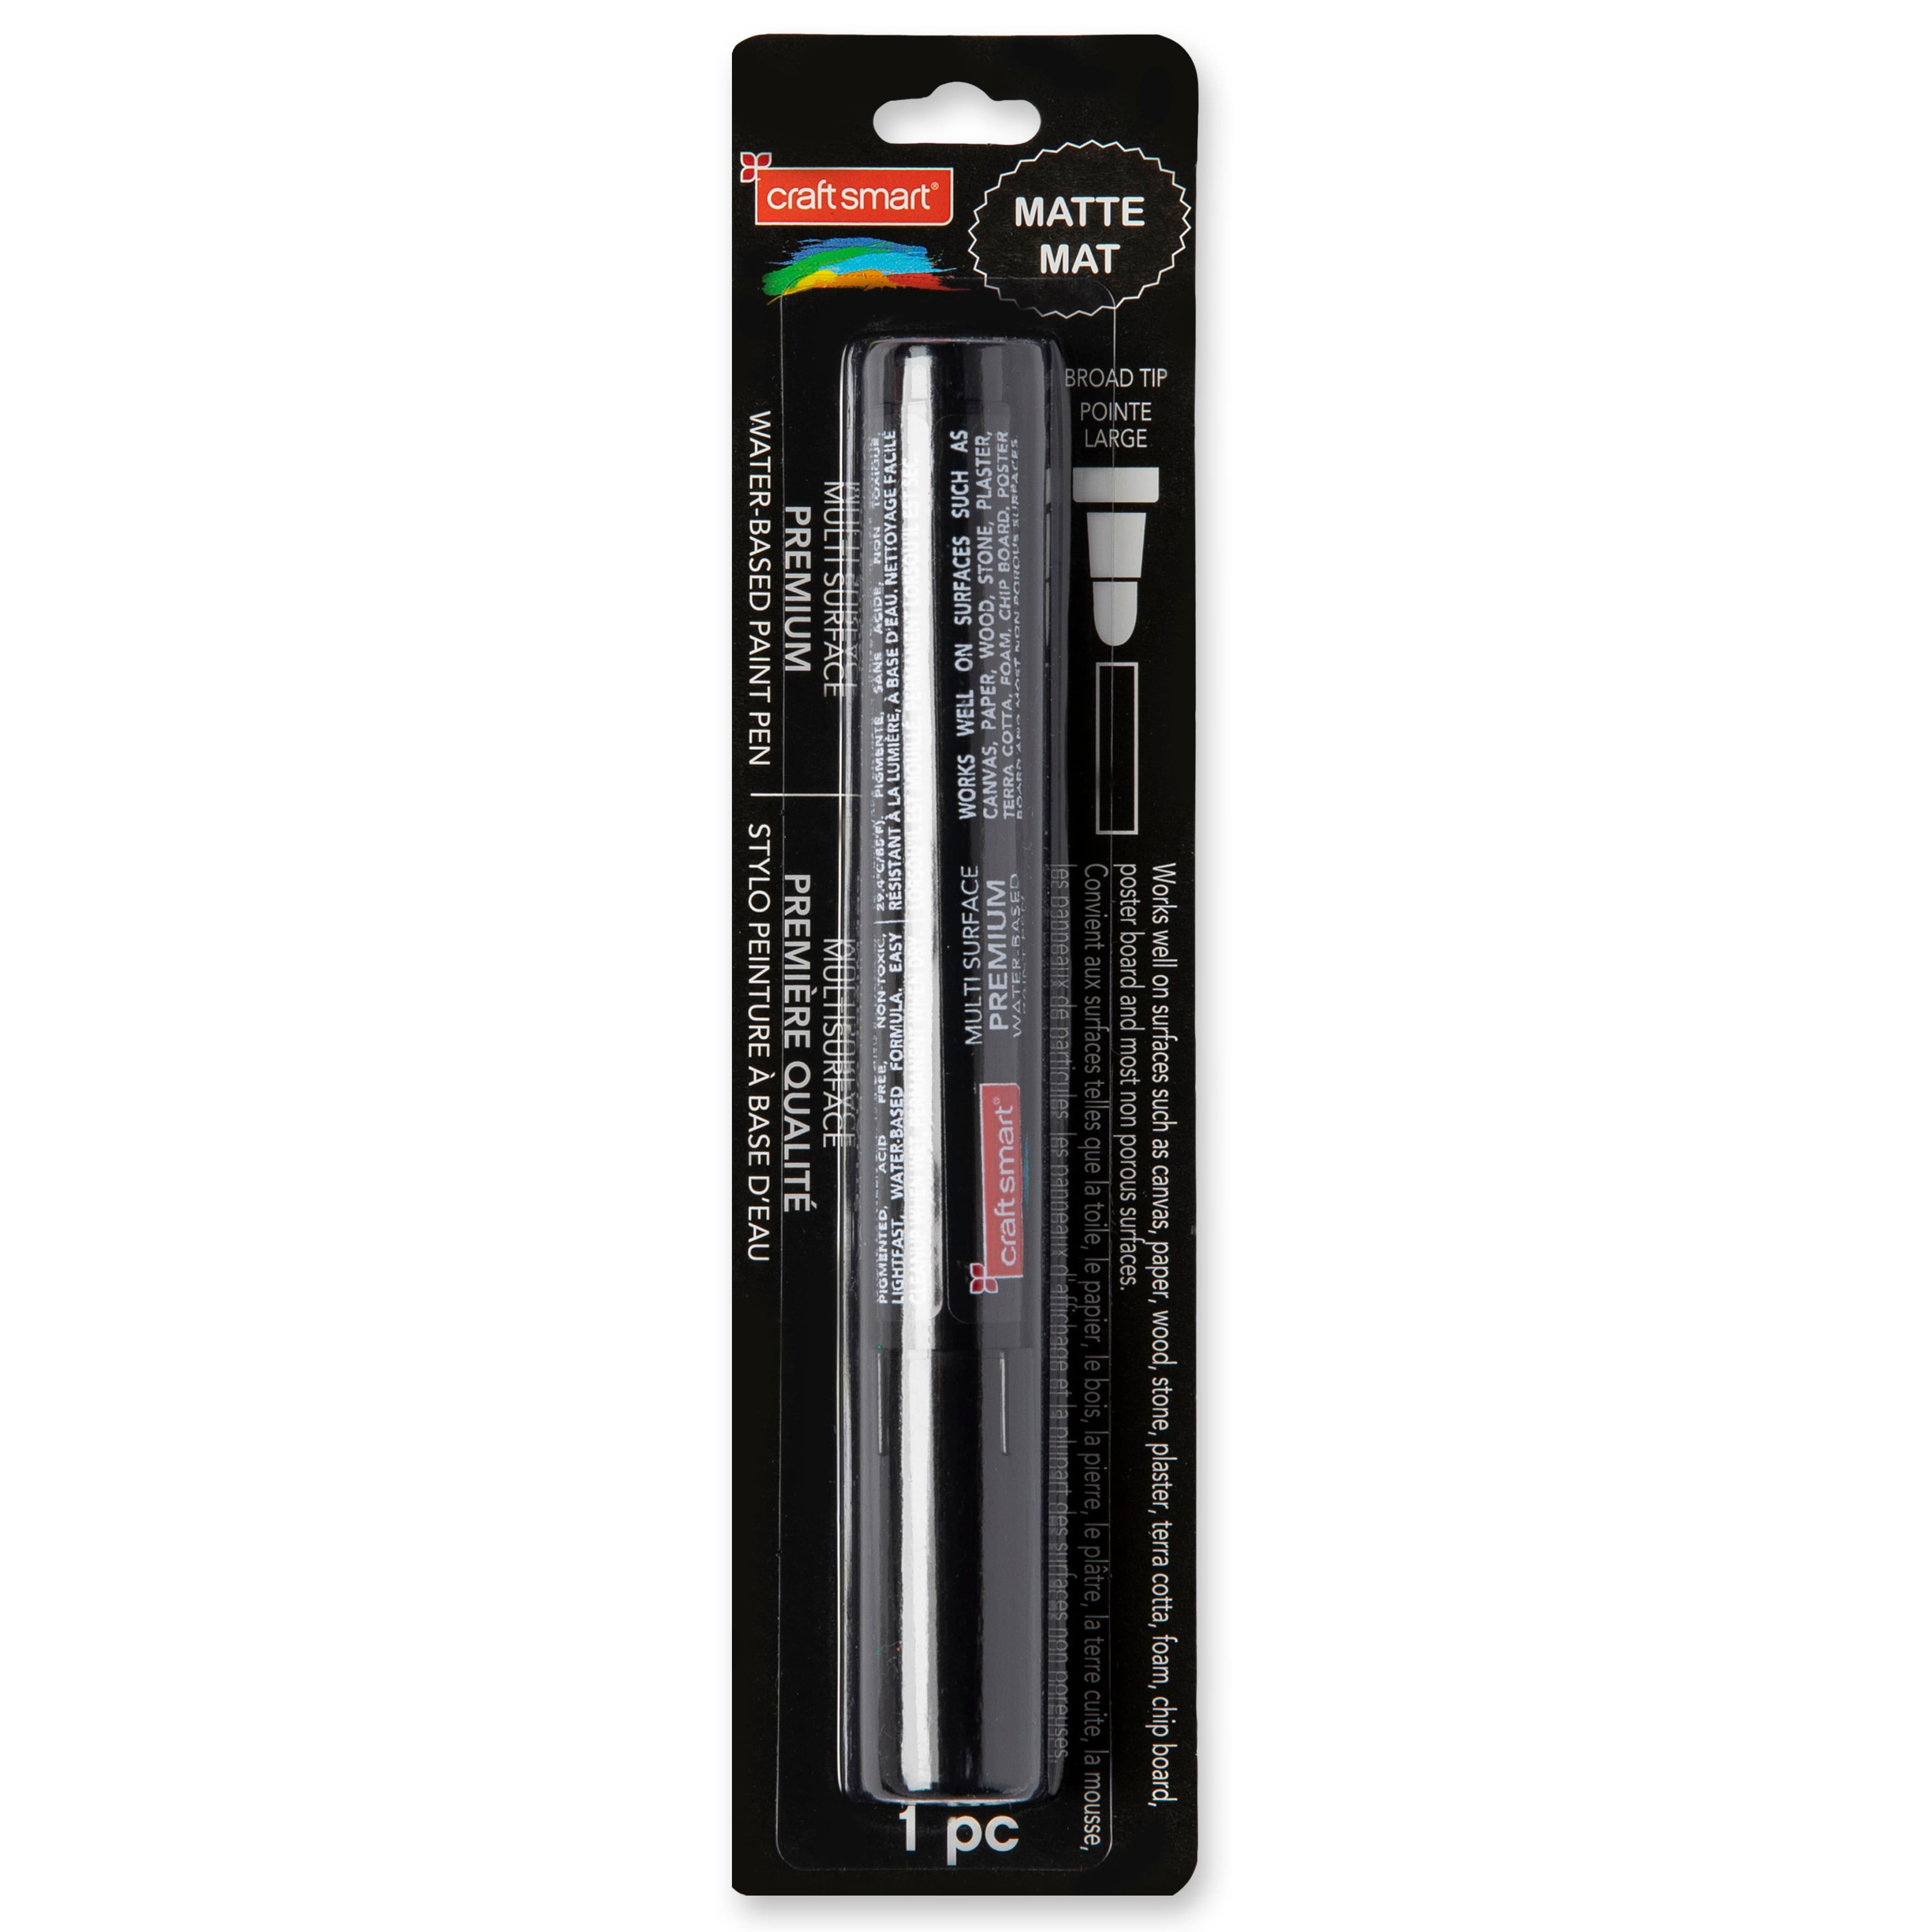 12 Pack: Premium Broad Tip Matte Water-Based Paint Pen by Craft Smart® 